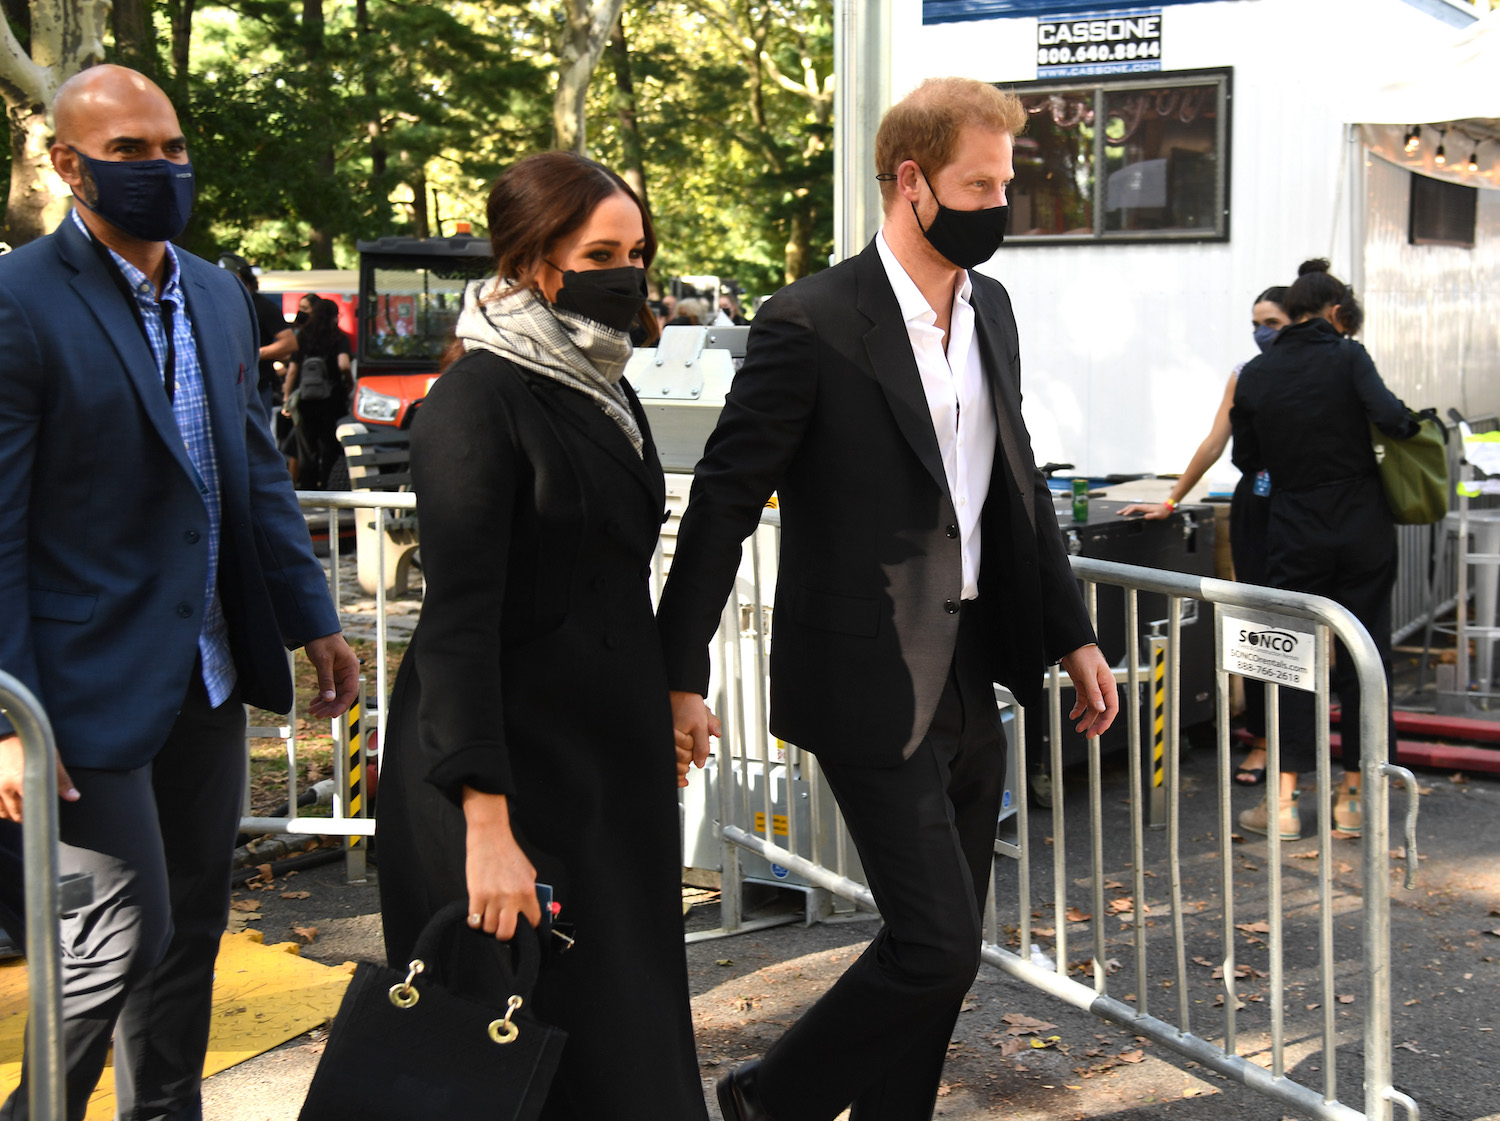 Meghan Markle and Prince Harry arrive at Global Citizen Live wearing face masks and holding hands